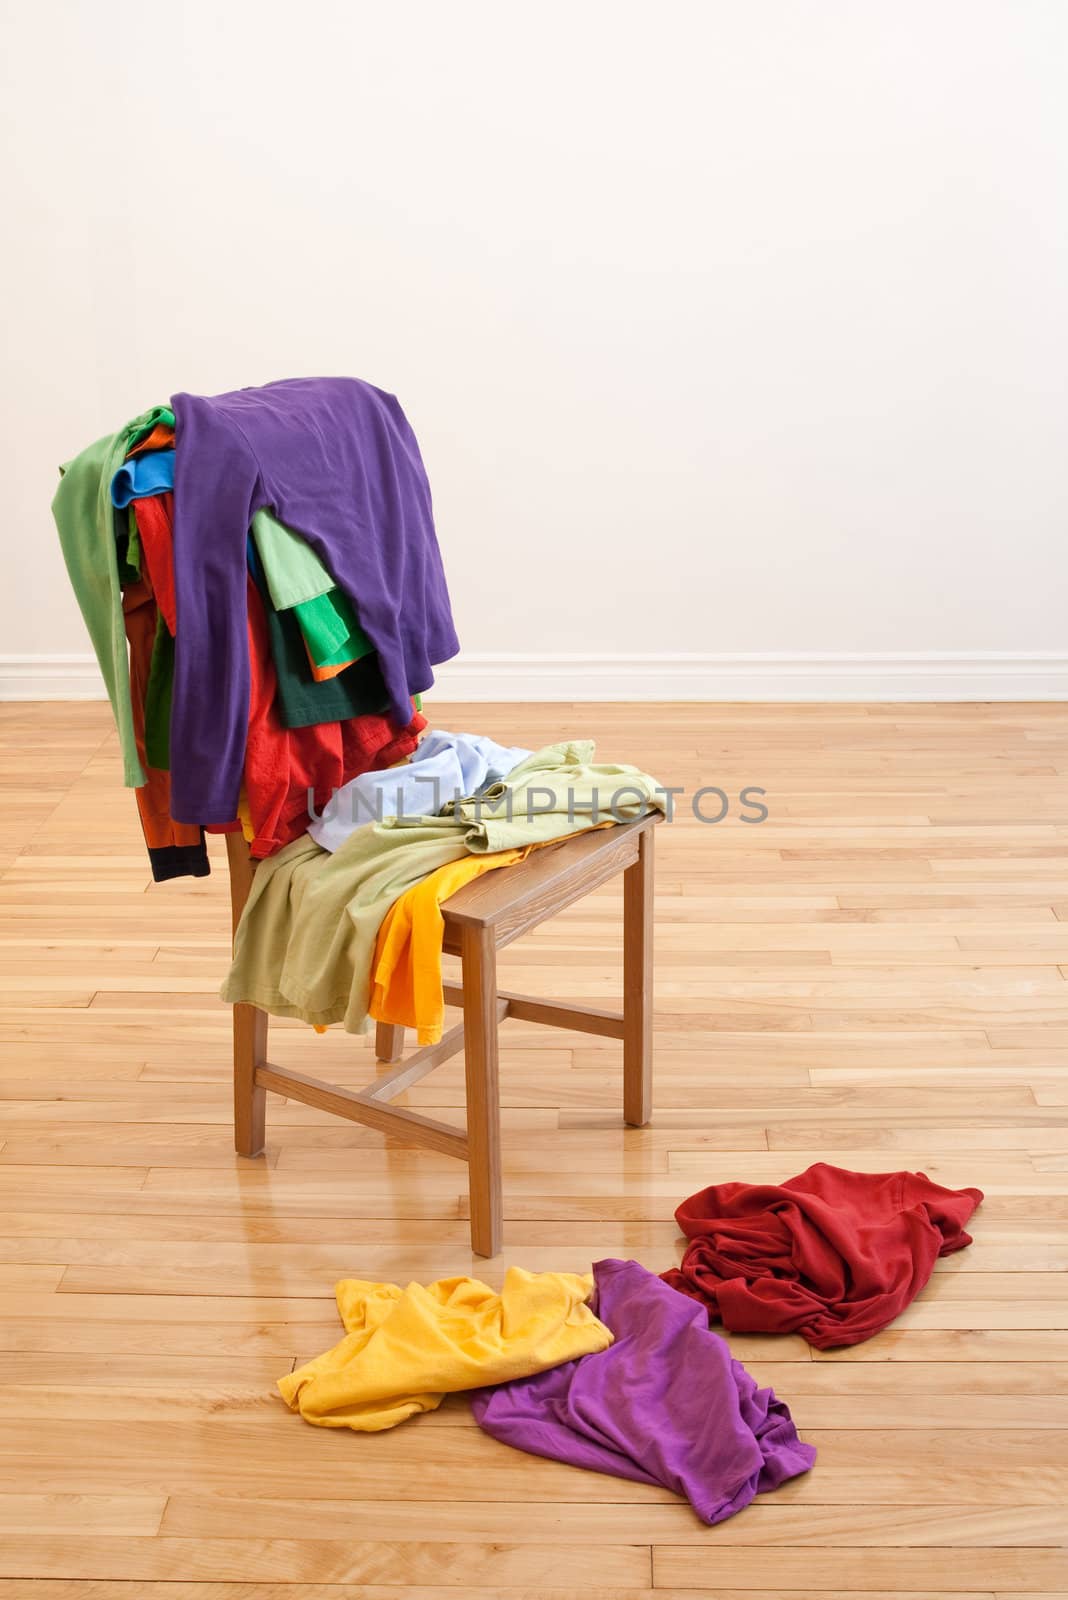 Lots of colorful messy clothes on a chair and on a wooden floor.